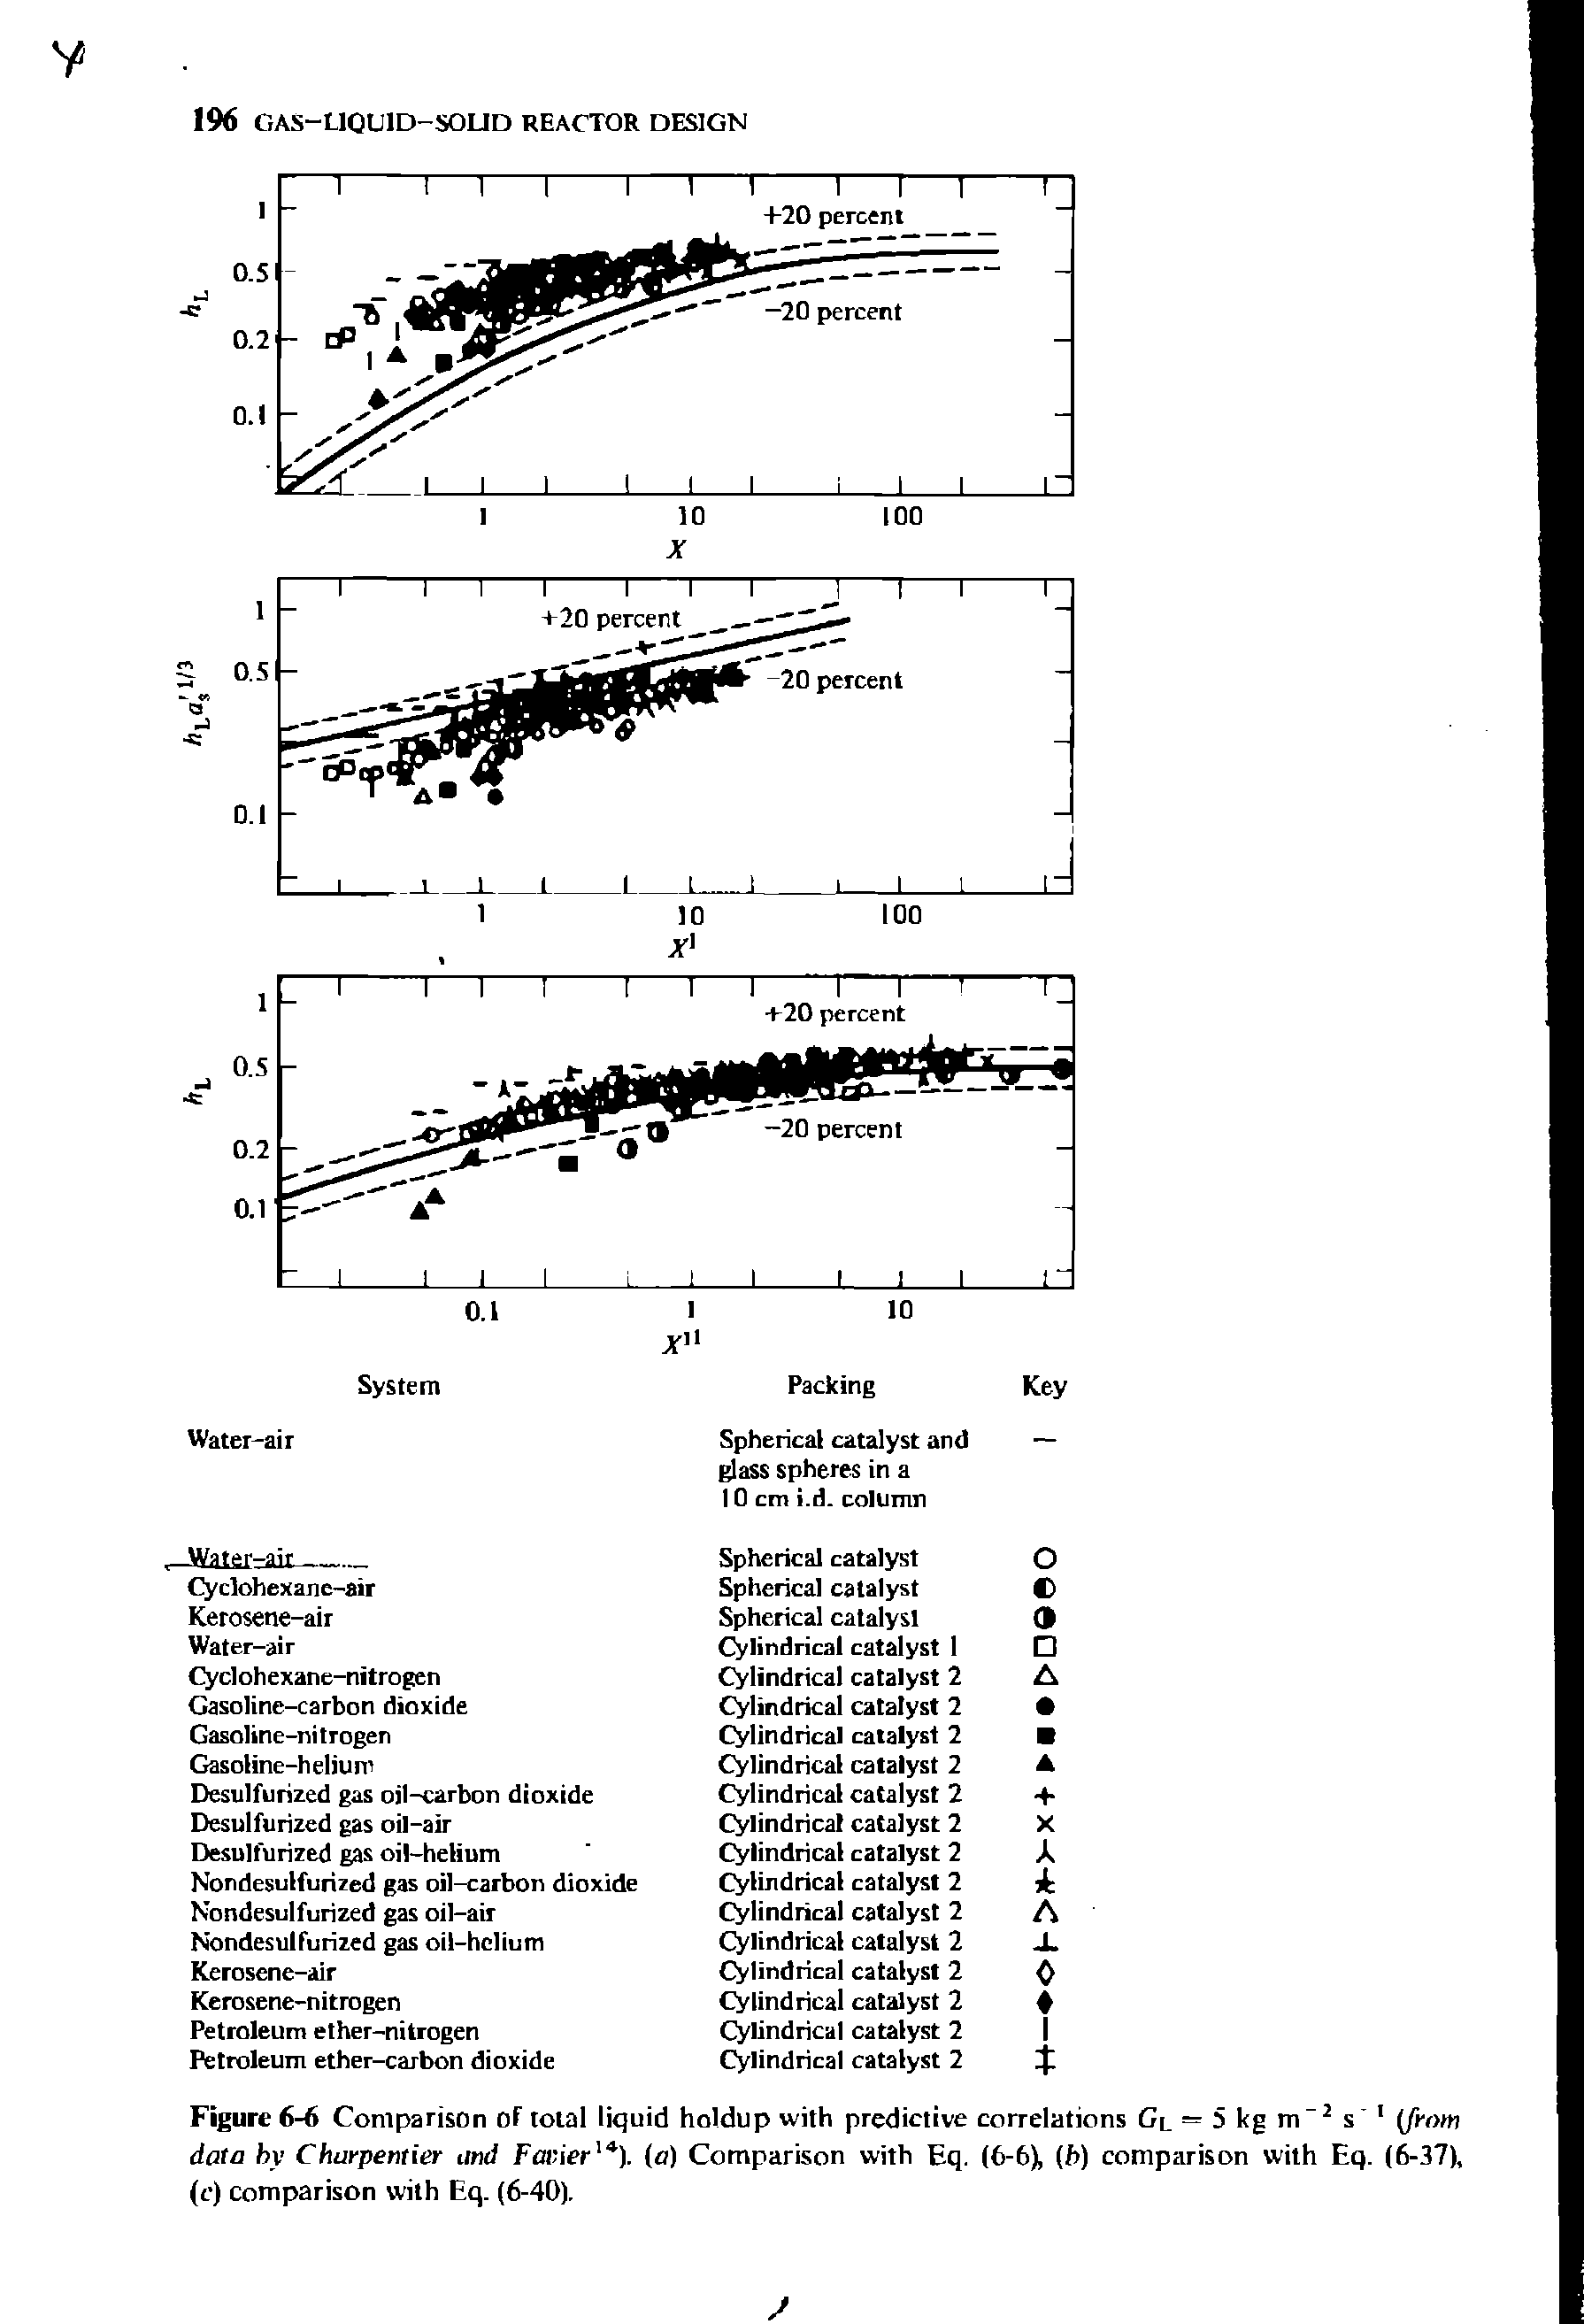 Figure 6-6 Comparison of total liquid holdup with predictive correlations Cl = 5 kg m-2 s 1 [from data by Charpentier and Favier14). (o) Comparison with Eq. (6-6), (h) comparison with Eq. (6-37), (e) comparison with Eq. (6-40).